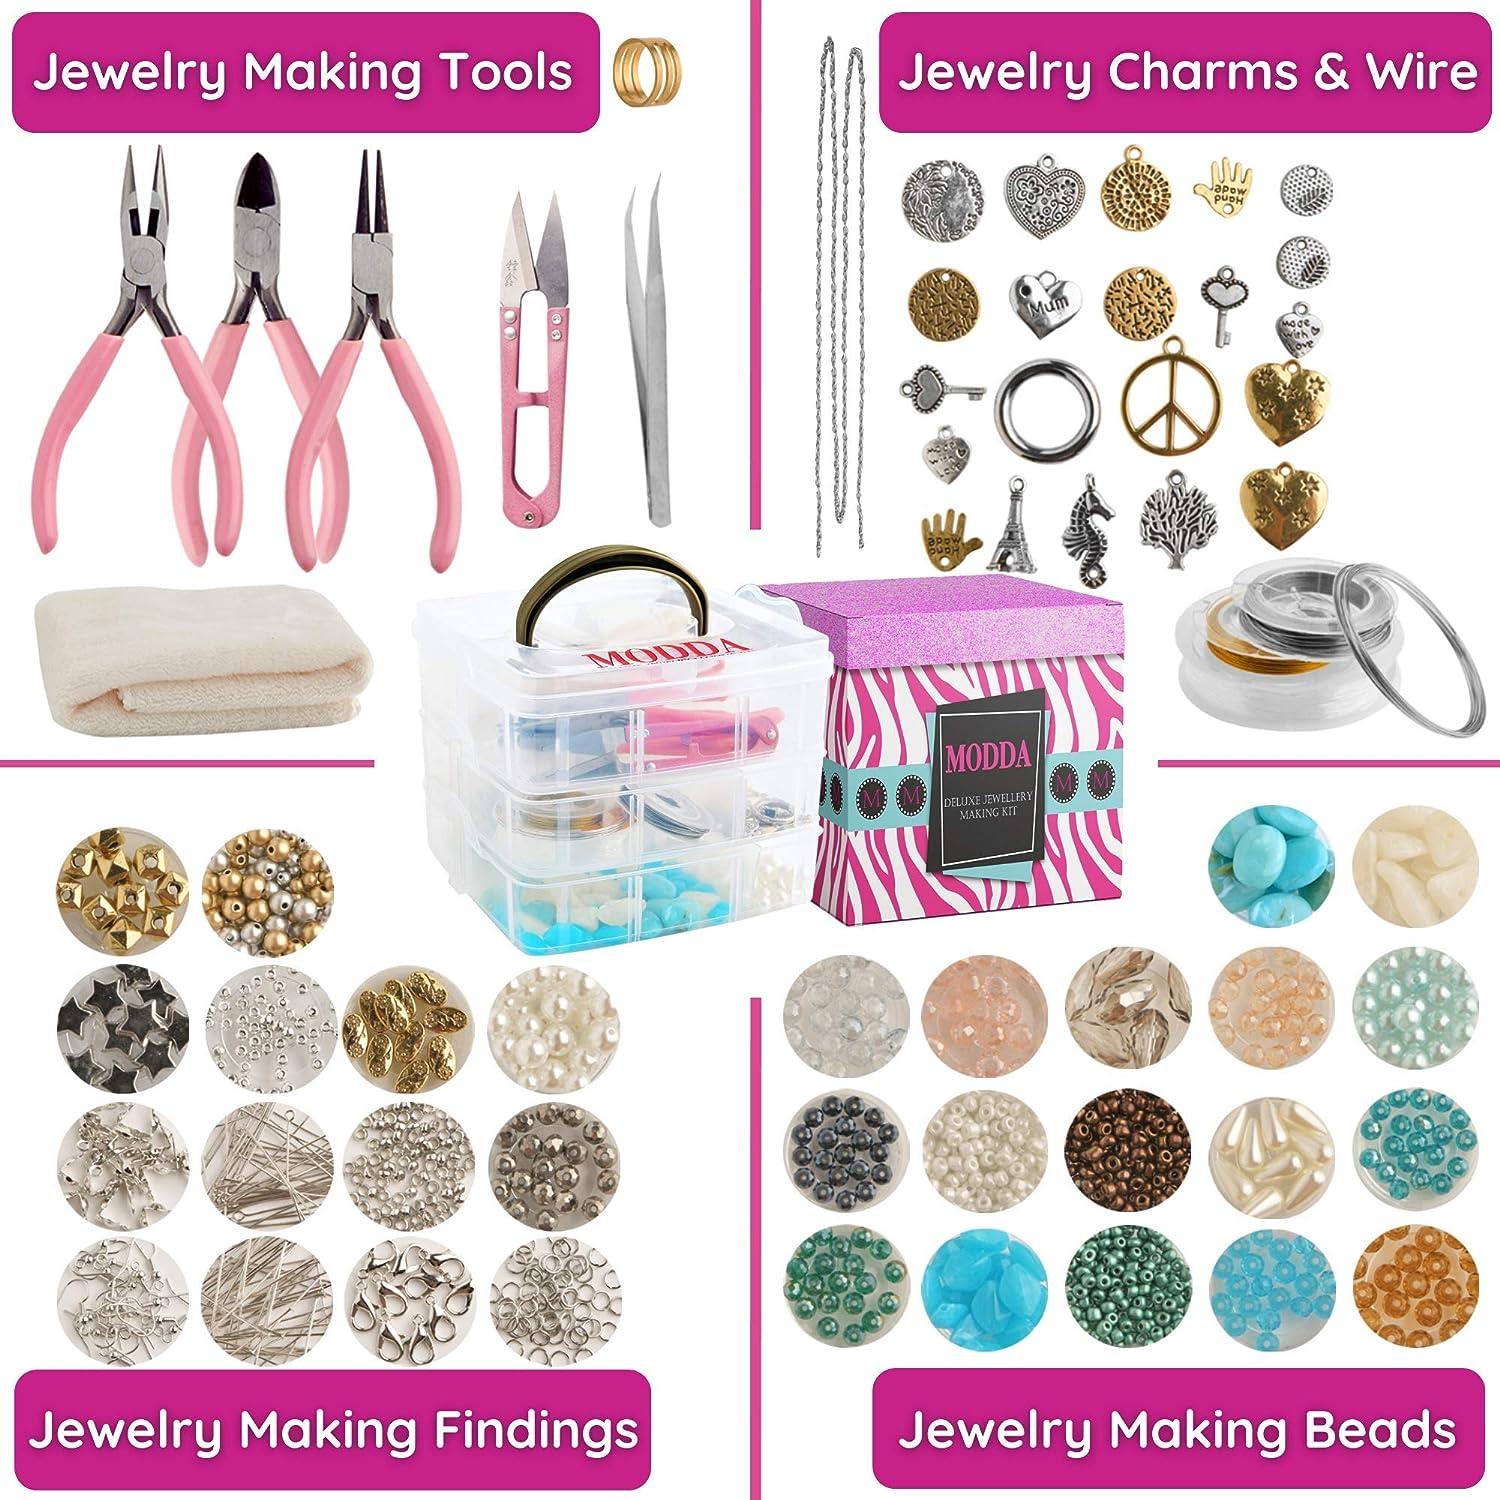 Modda Deluxe Jewelry Making Kit with Video Course Includes Instructions  Beads Necklace Bracelet Earrings Making Crafts for Adults Beginners  Christmas Gift for Teens Girls 13-15 Moms Women